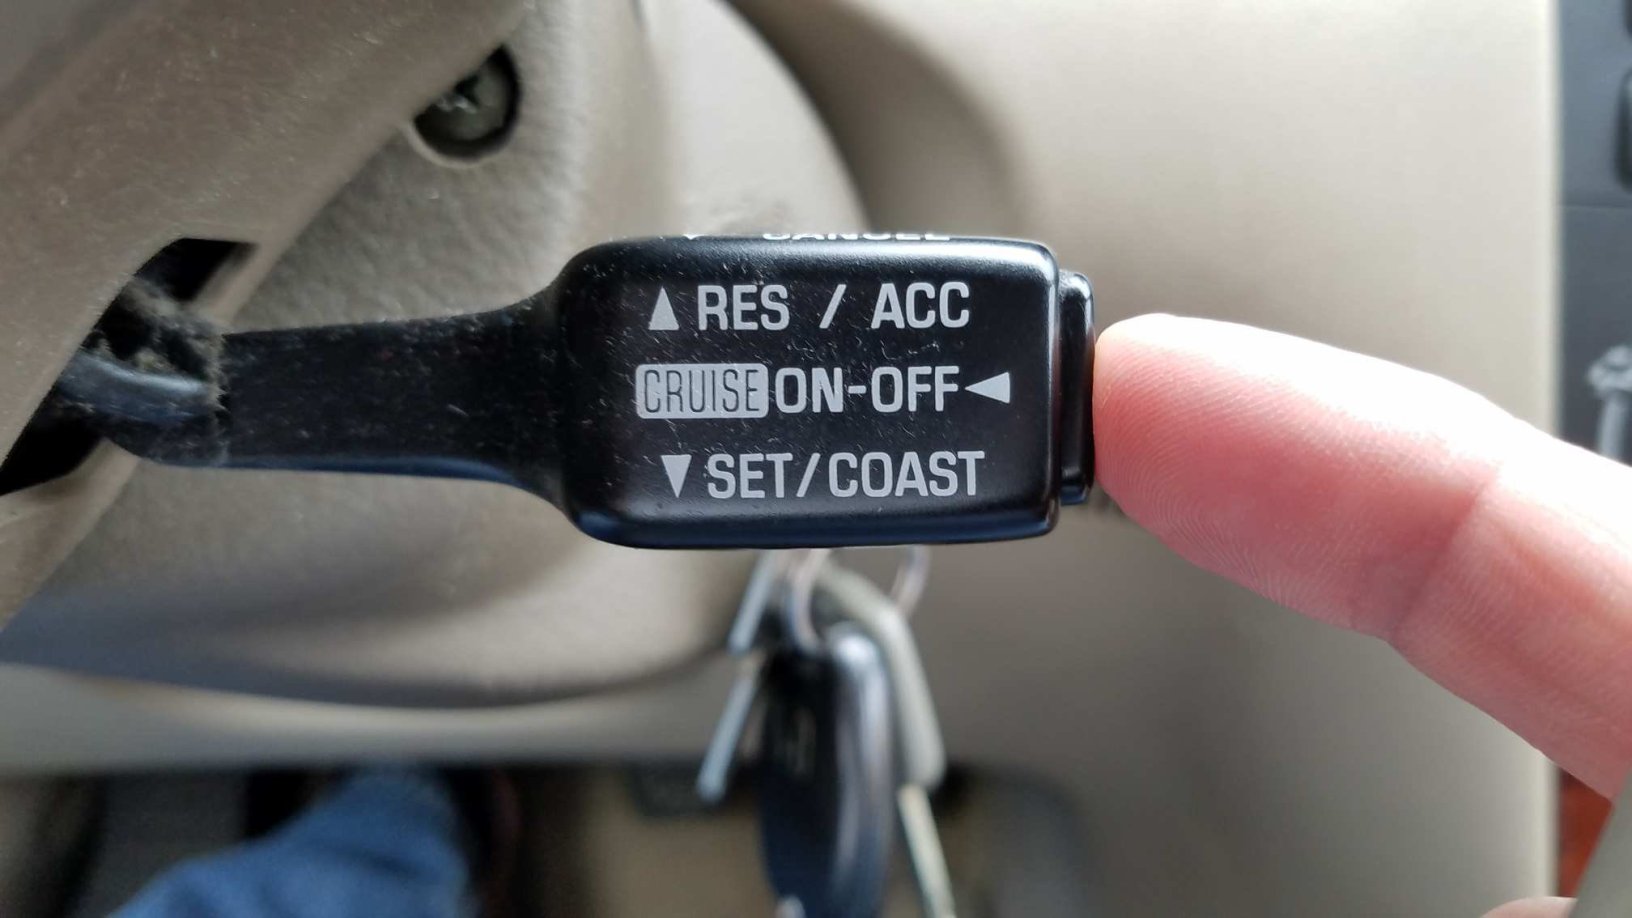 Cruise Control How to Set on a Toyota Corolla Practical Mechanic